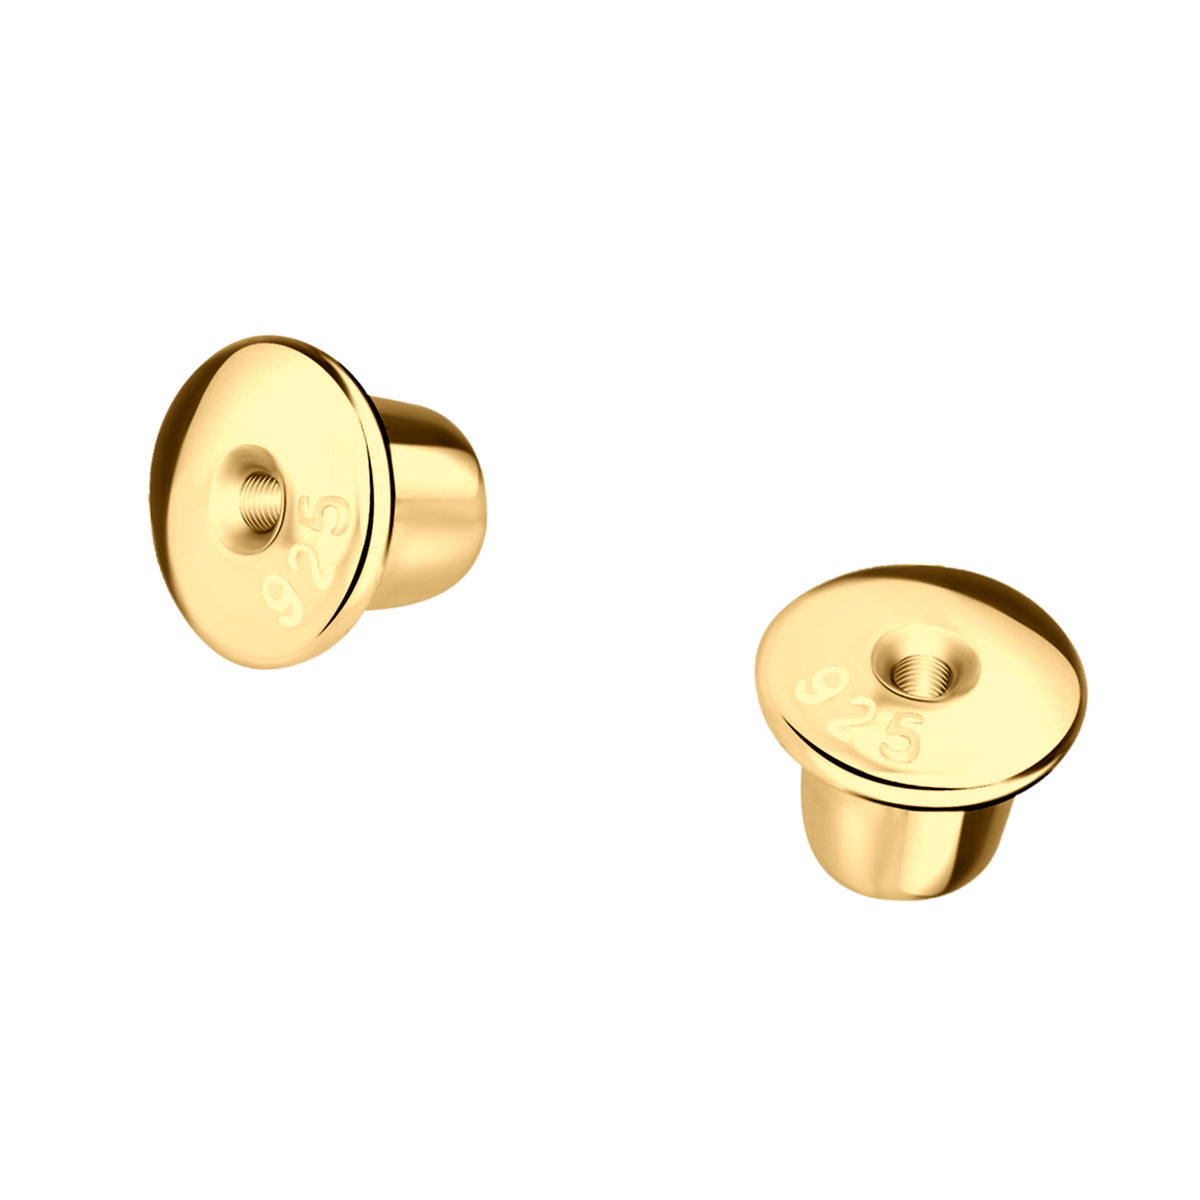 Screw Back Earrings Replacement Backs Nuts 925 Silver Or 14k Gold -  HARLEMBLING COMPATIBLE - HarlemBling